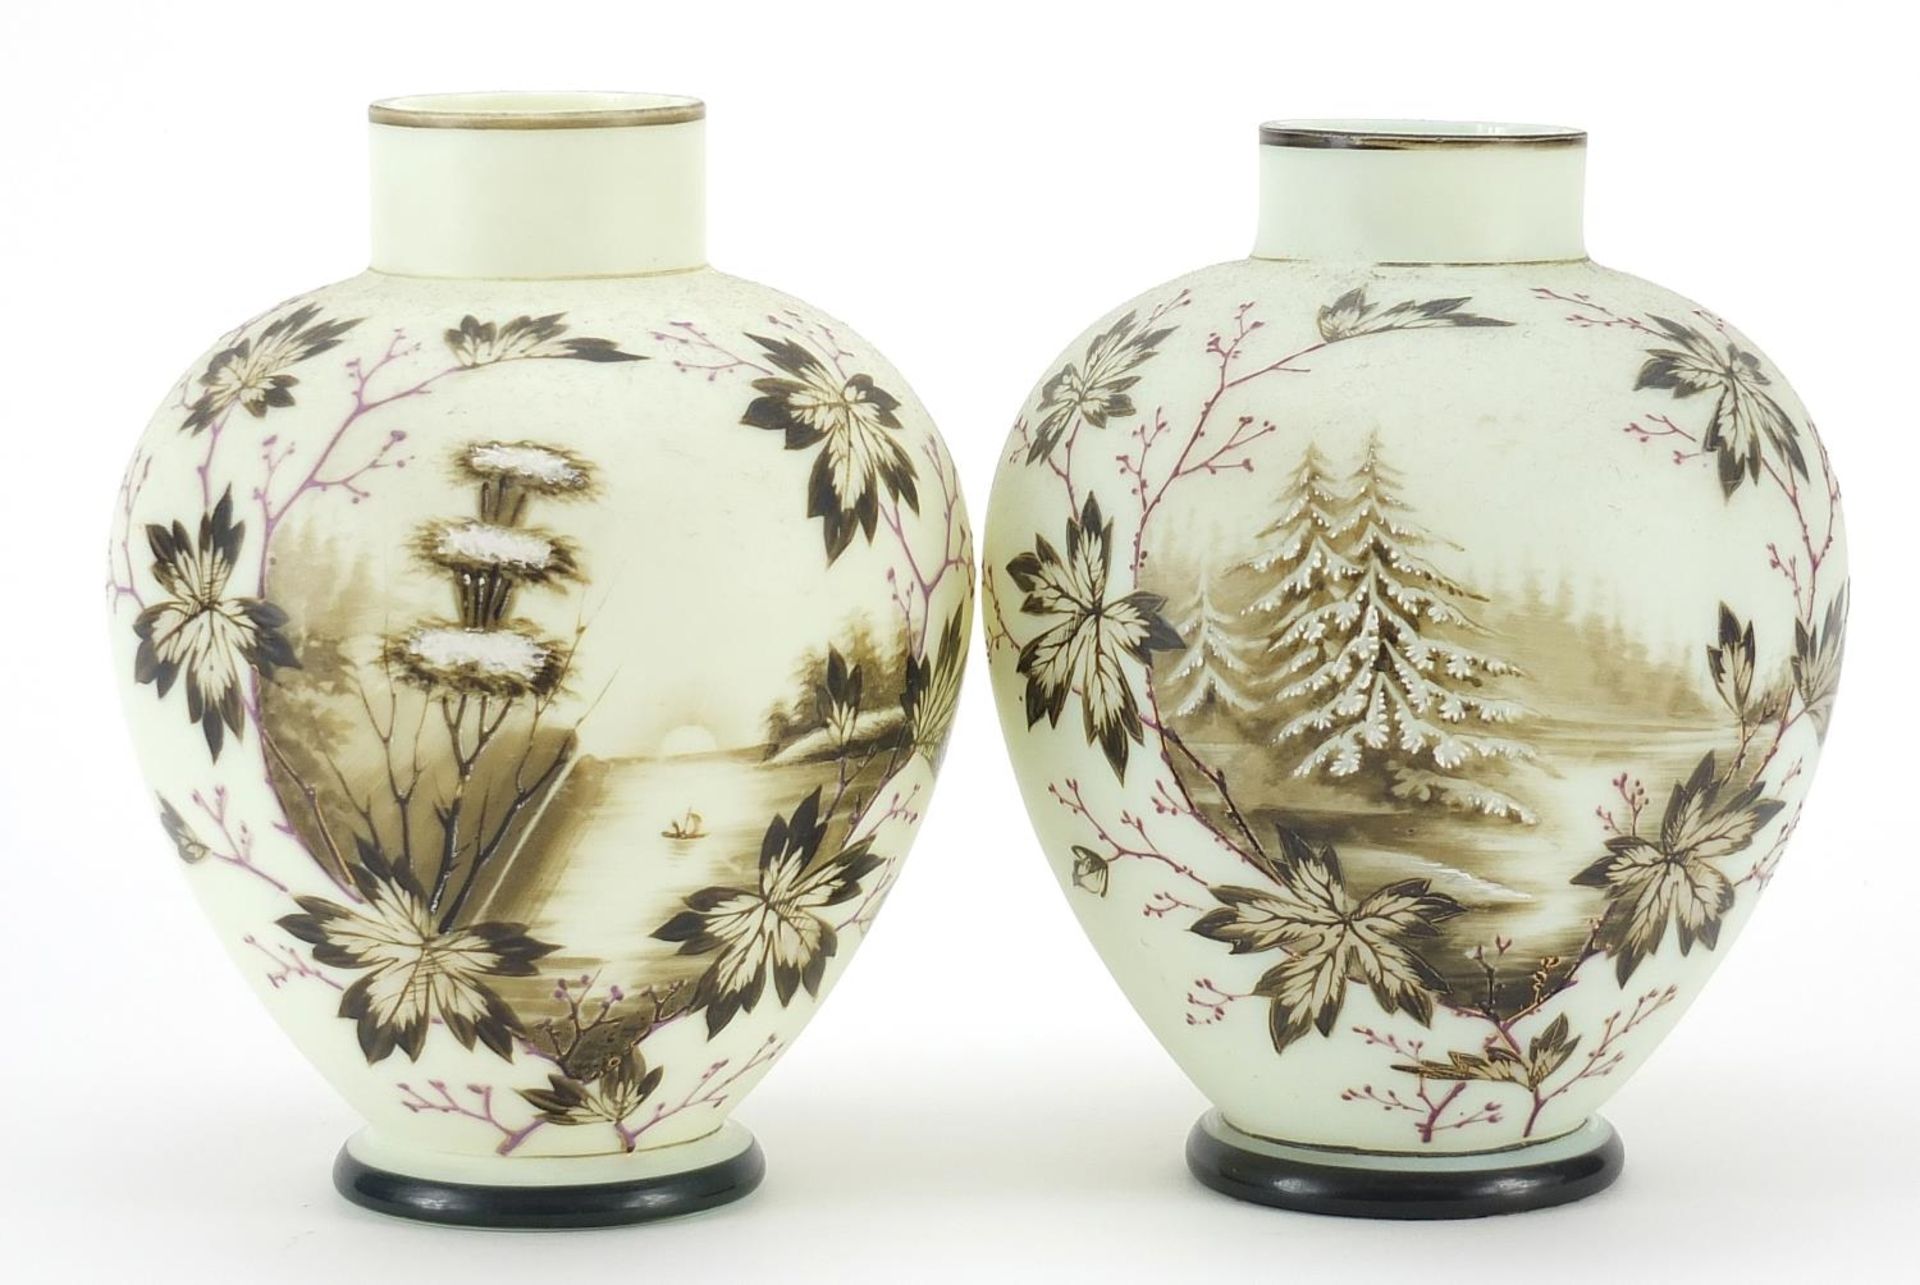 Pair of 19th century opaline glass vases hand painted with trees beside water within floral borders,